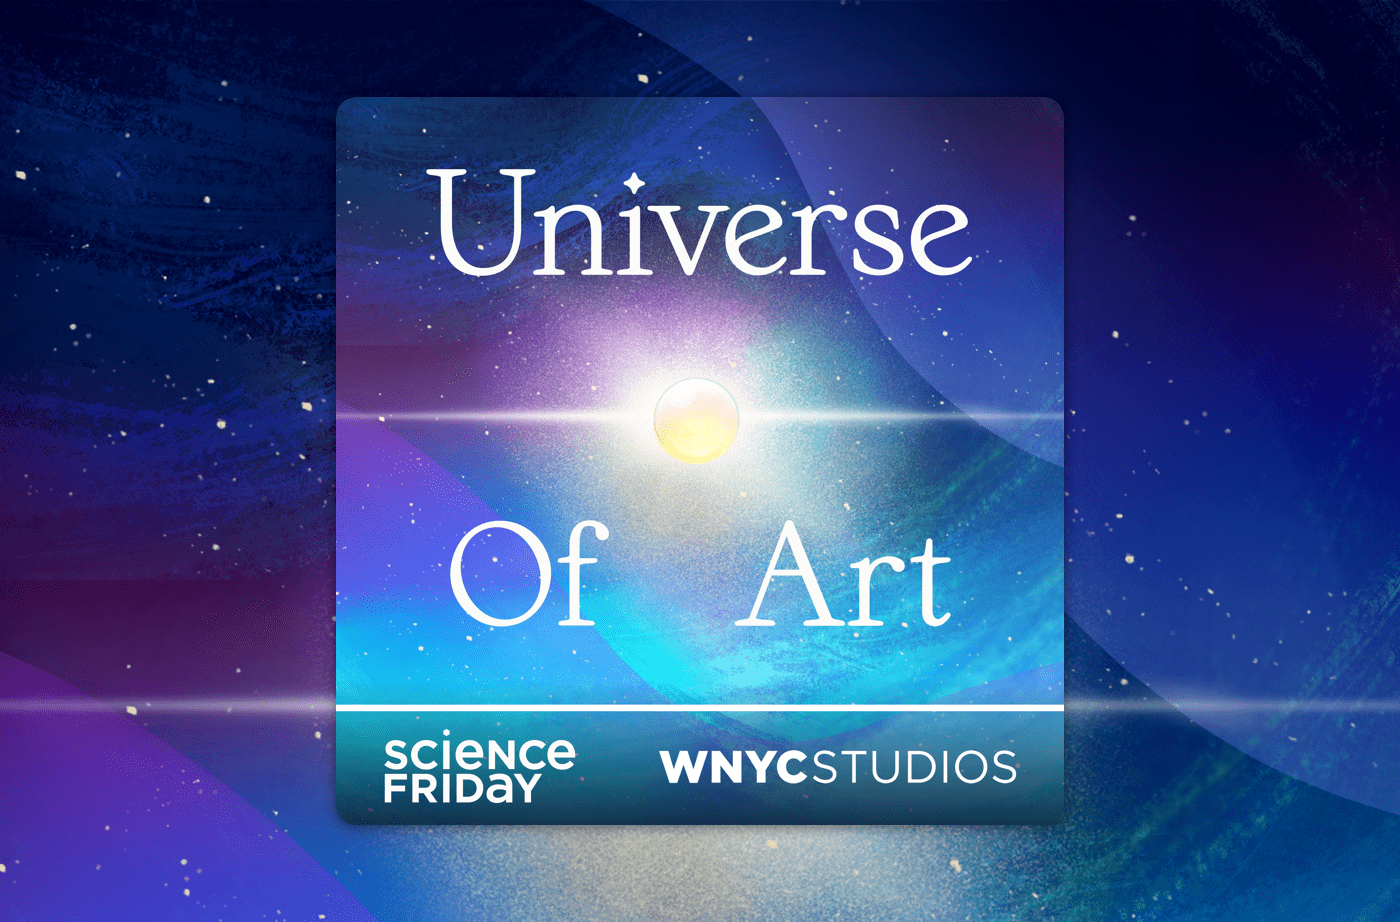 podcast album art that says universe of art, from science friday and wnyc studios. the background is an abstract ethereal painting that looks like a nebula or galaxy with swirling blue and purple clouds. a glowing abstract orb is at the center